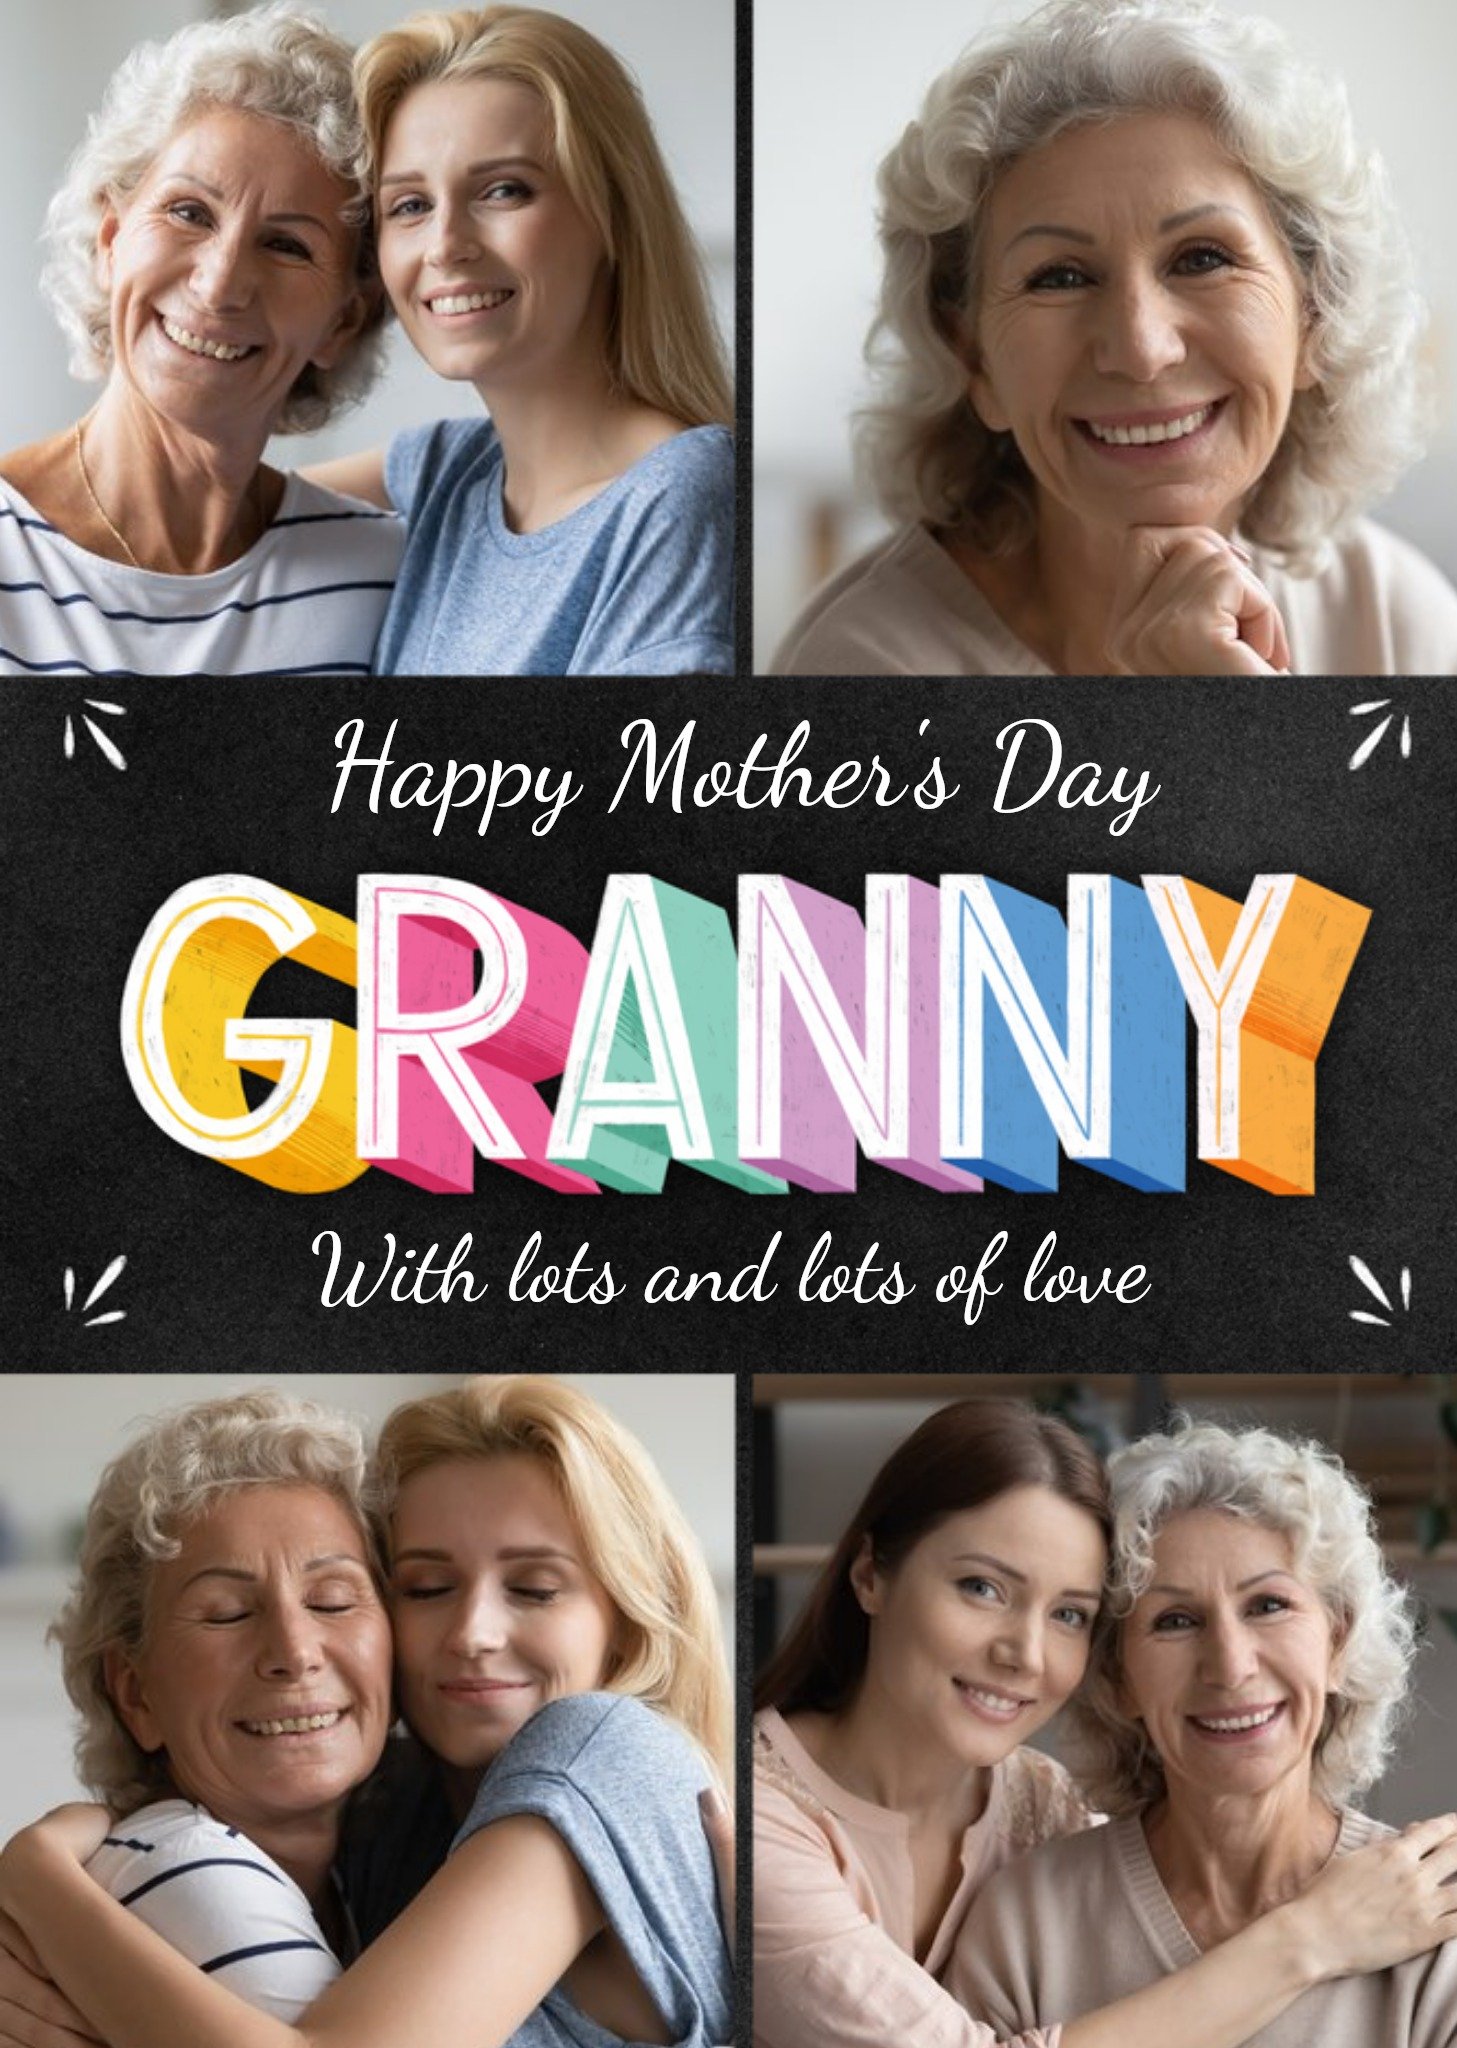 Moonpig Colourful Typographic Granny Lots Of Love Mother's Day Photo Upload Card, Large